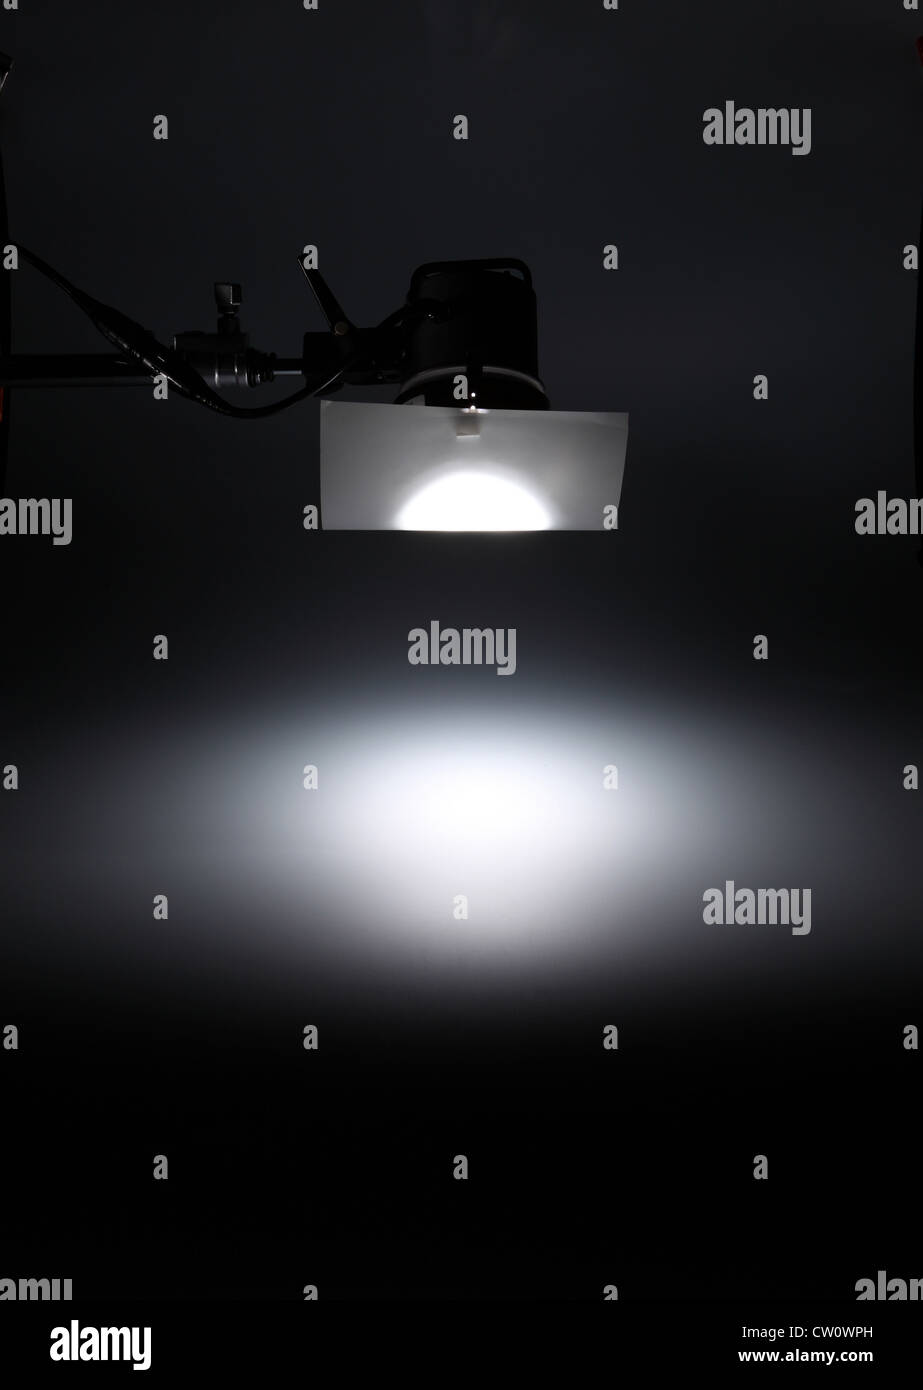 A photographic light from above creating a white spotlight on an empty dark background. Stock Photo